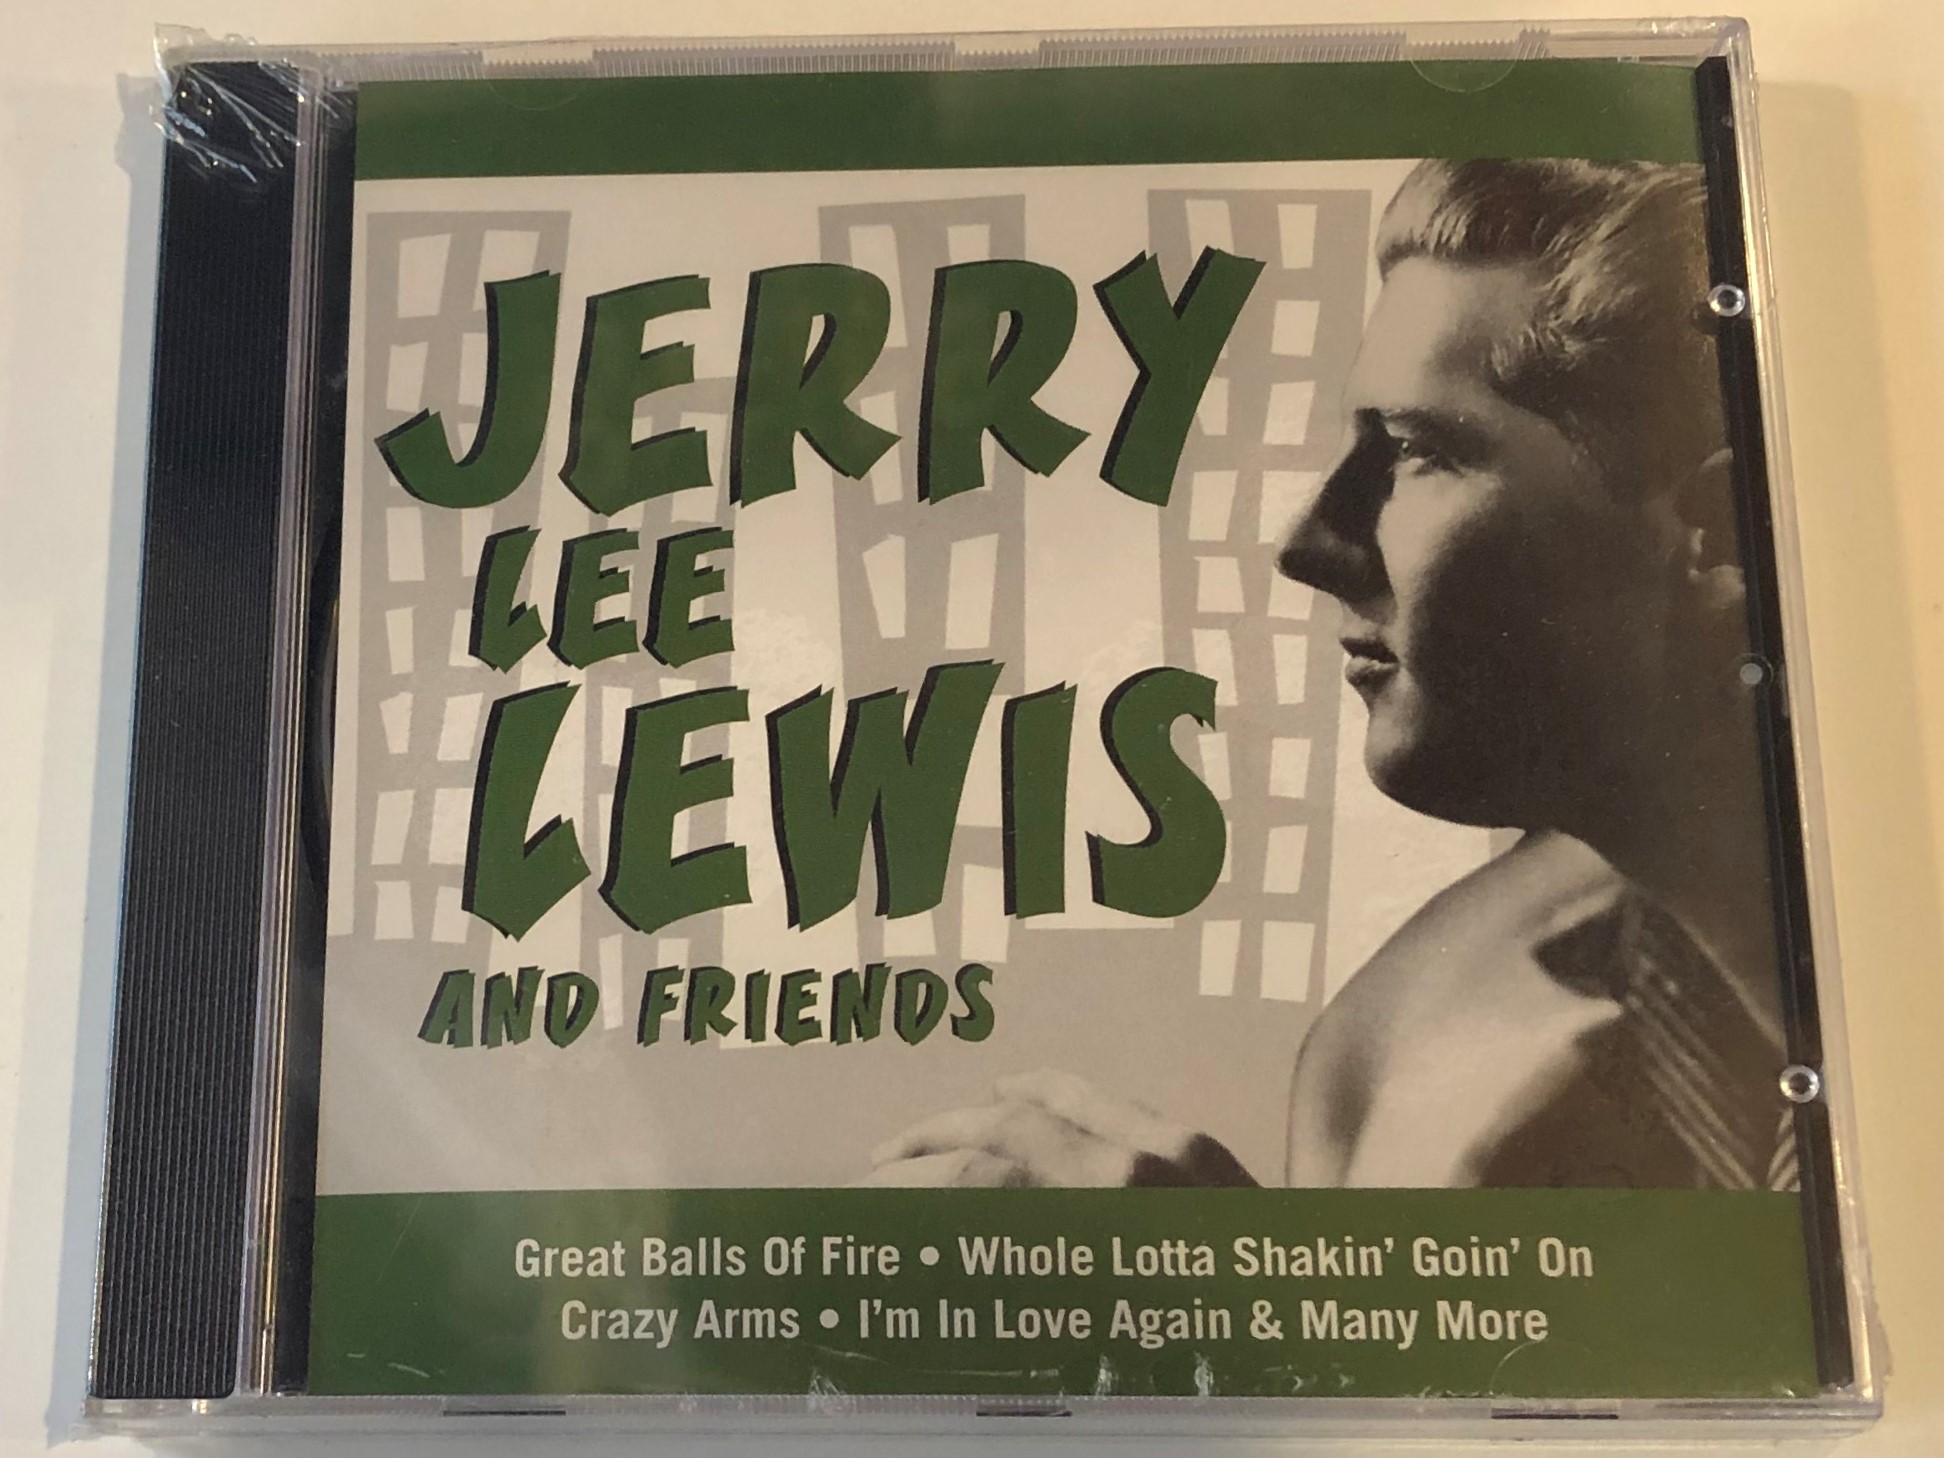 jerry-lee-lewis-and-friends-great-balls-of-fire-whole-lotta-shakin-goin-on-crazy-arms-i-m-in-love-again-many-more-fox-music-audio-cd-fu-1035-1-.jpg